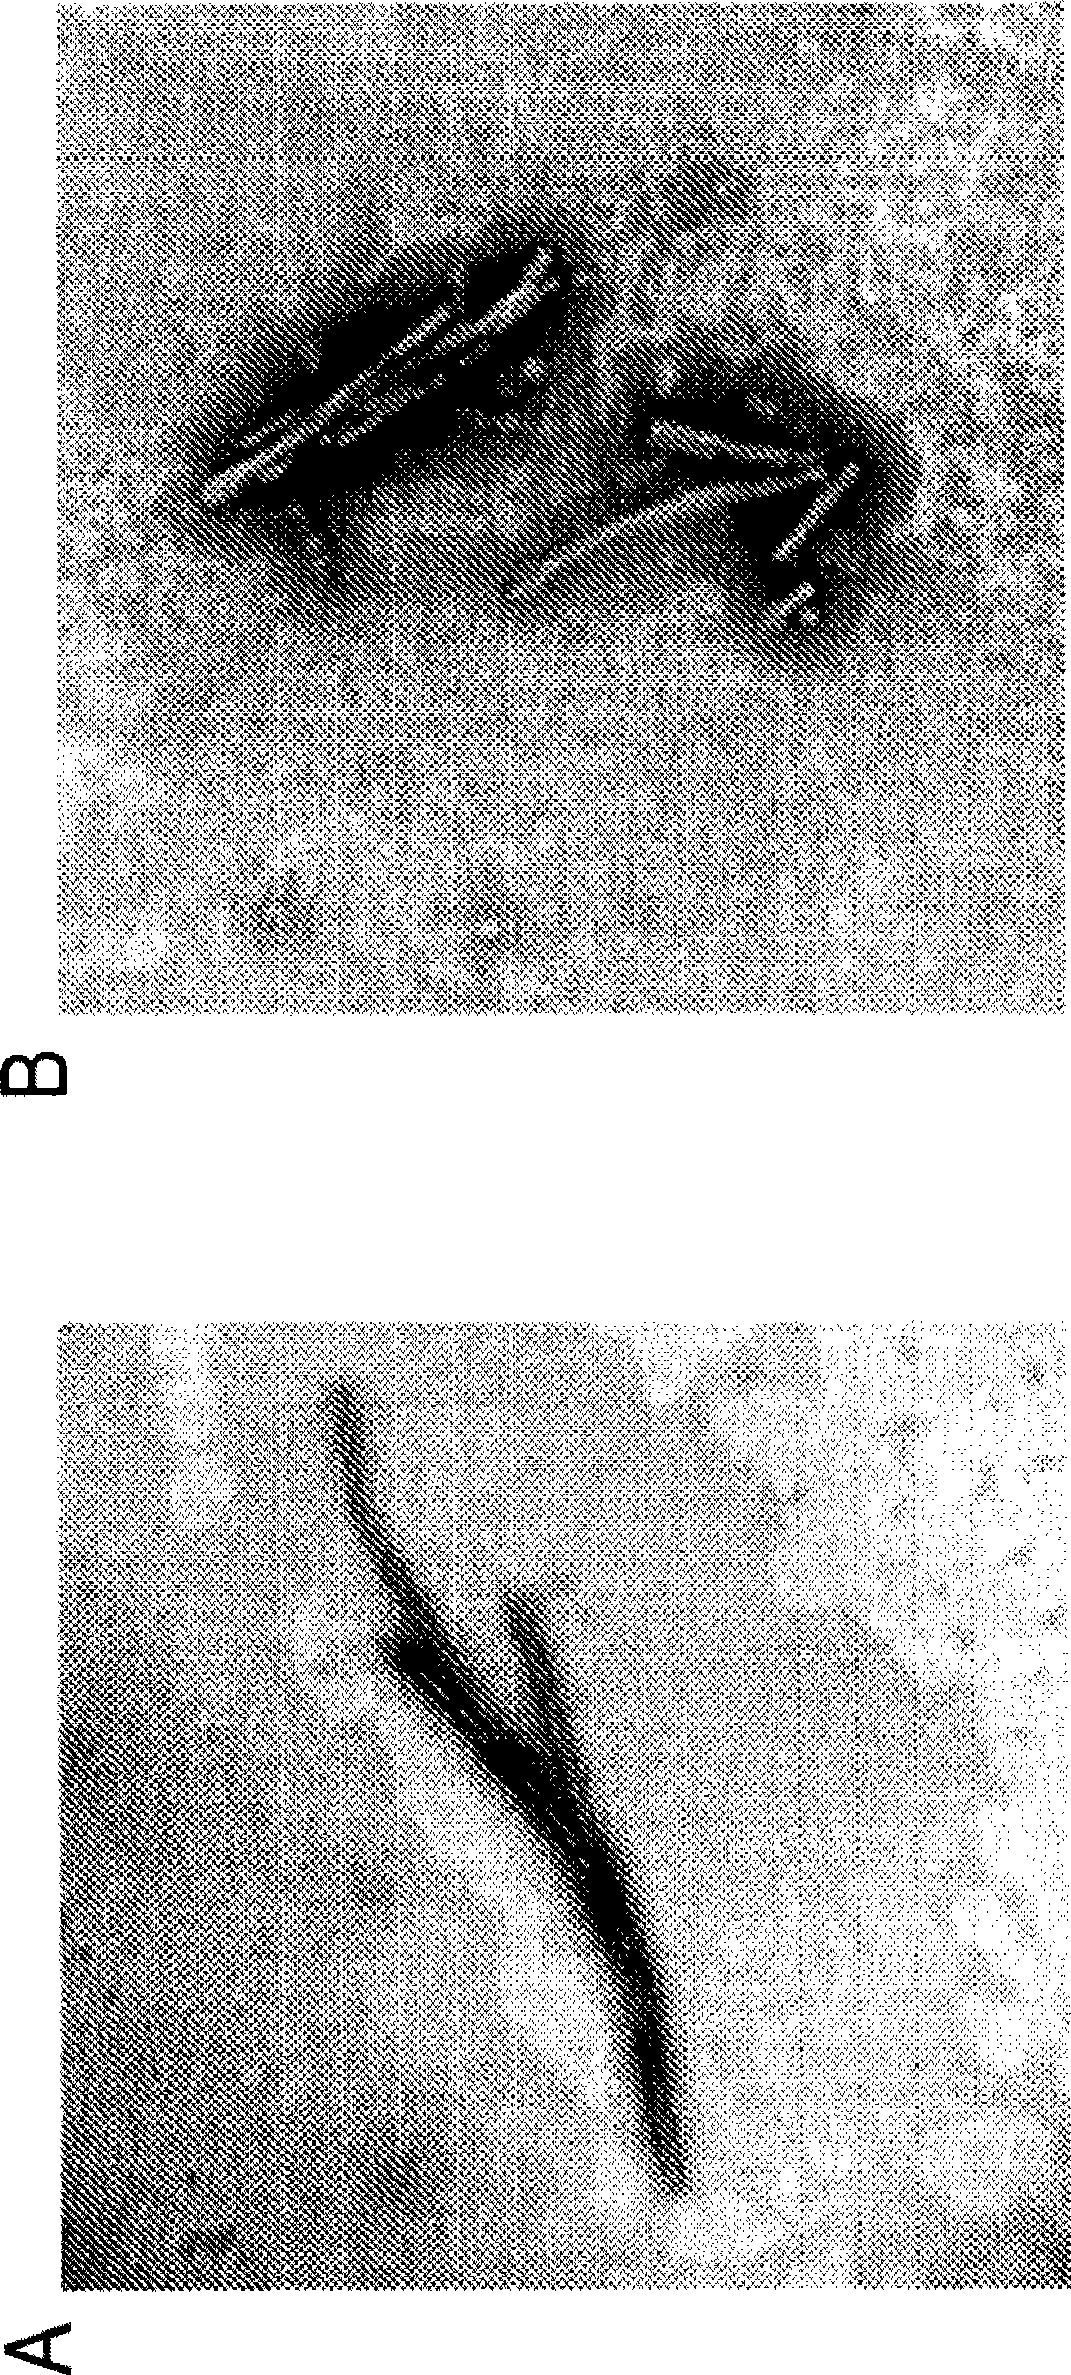 Process to produce fibrillar proteins and method of treating using fibrillar proteins